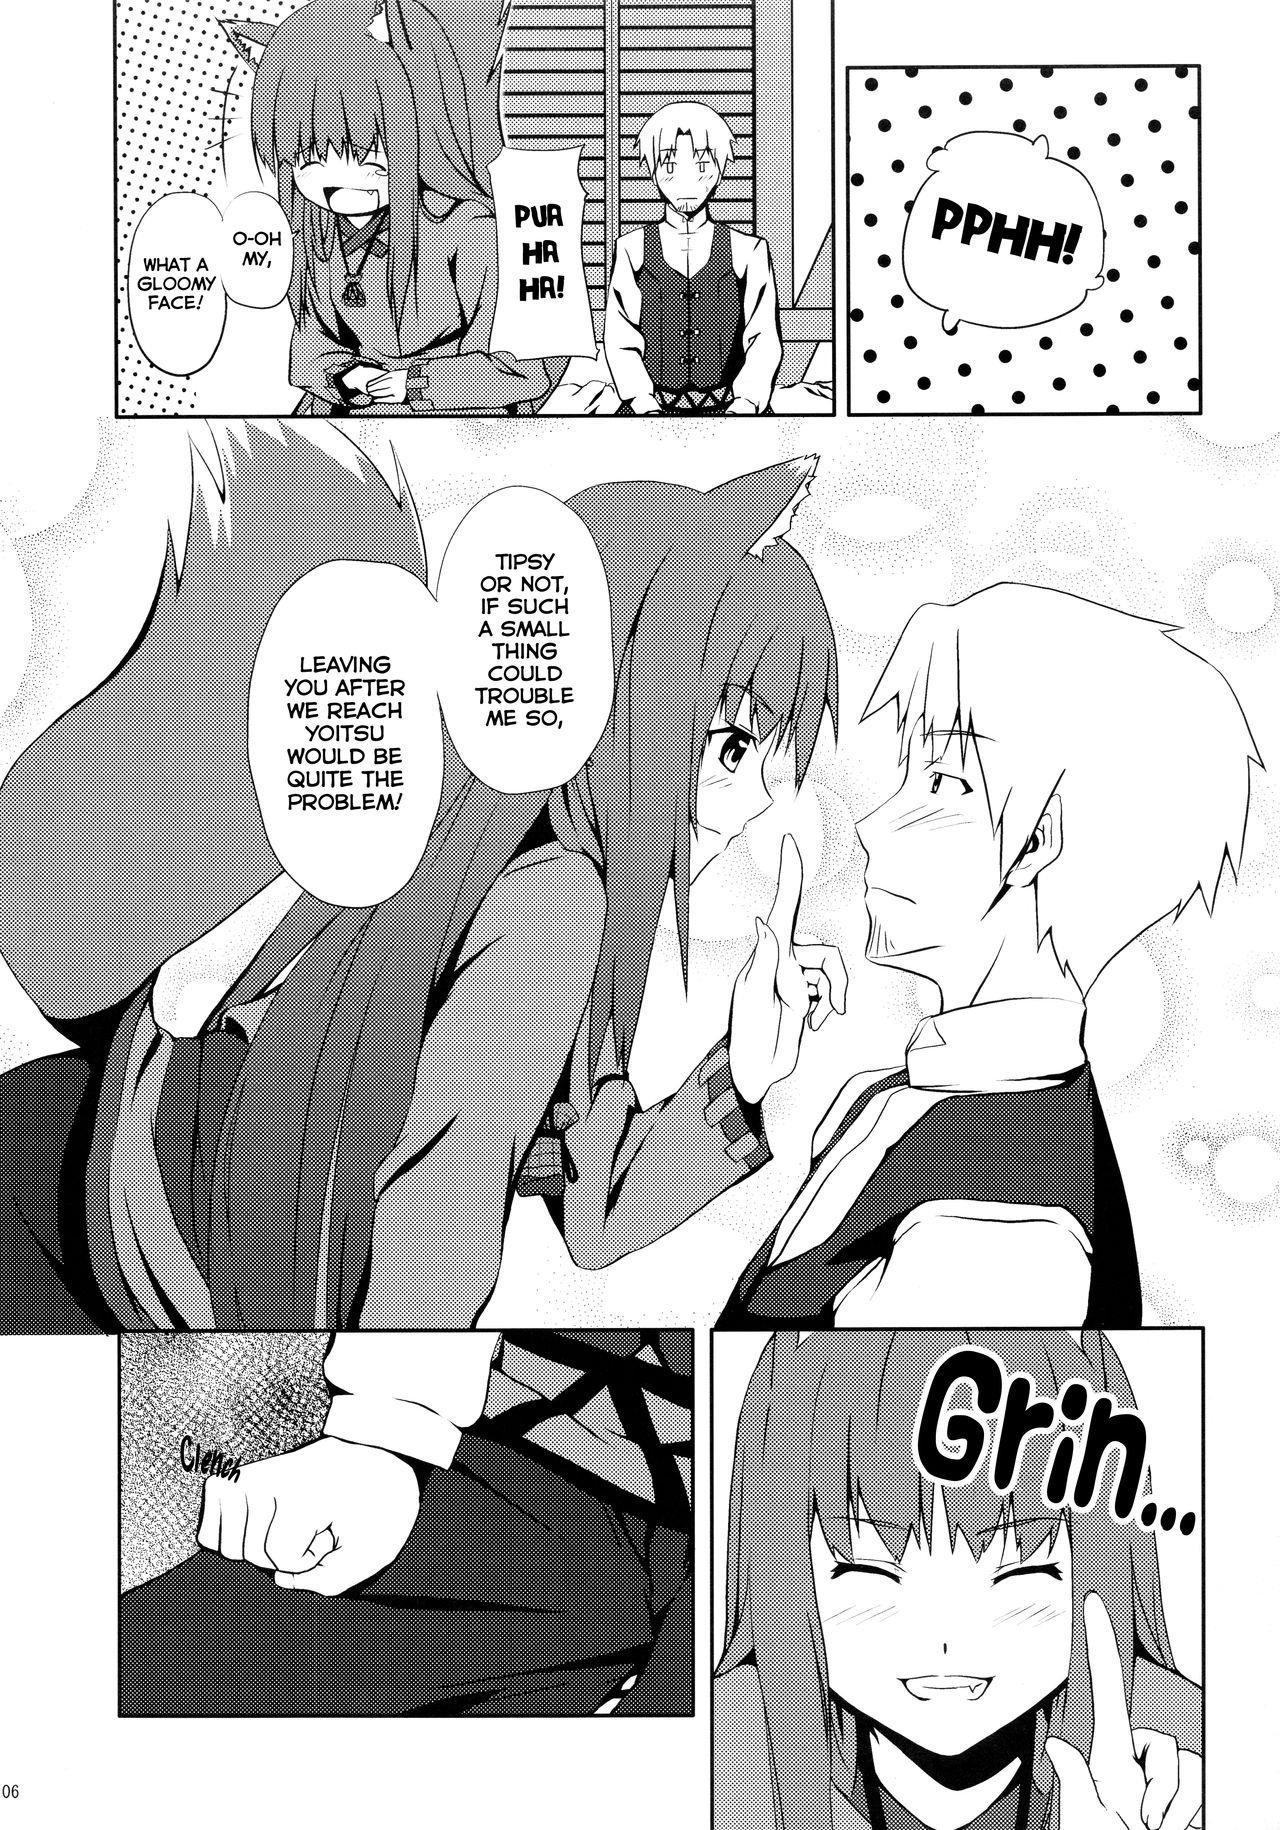 Chilena Bitter Apple - Spice and wolf Licking Pussy - Page 6